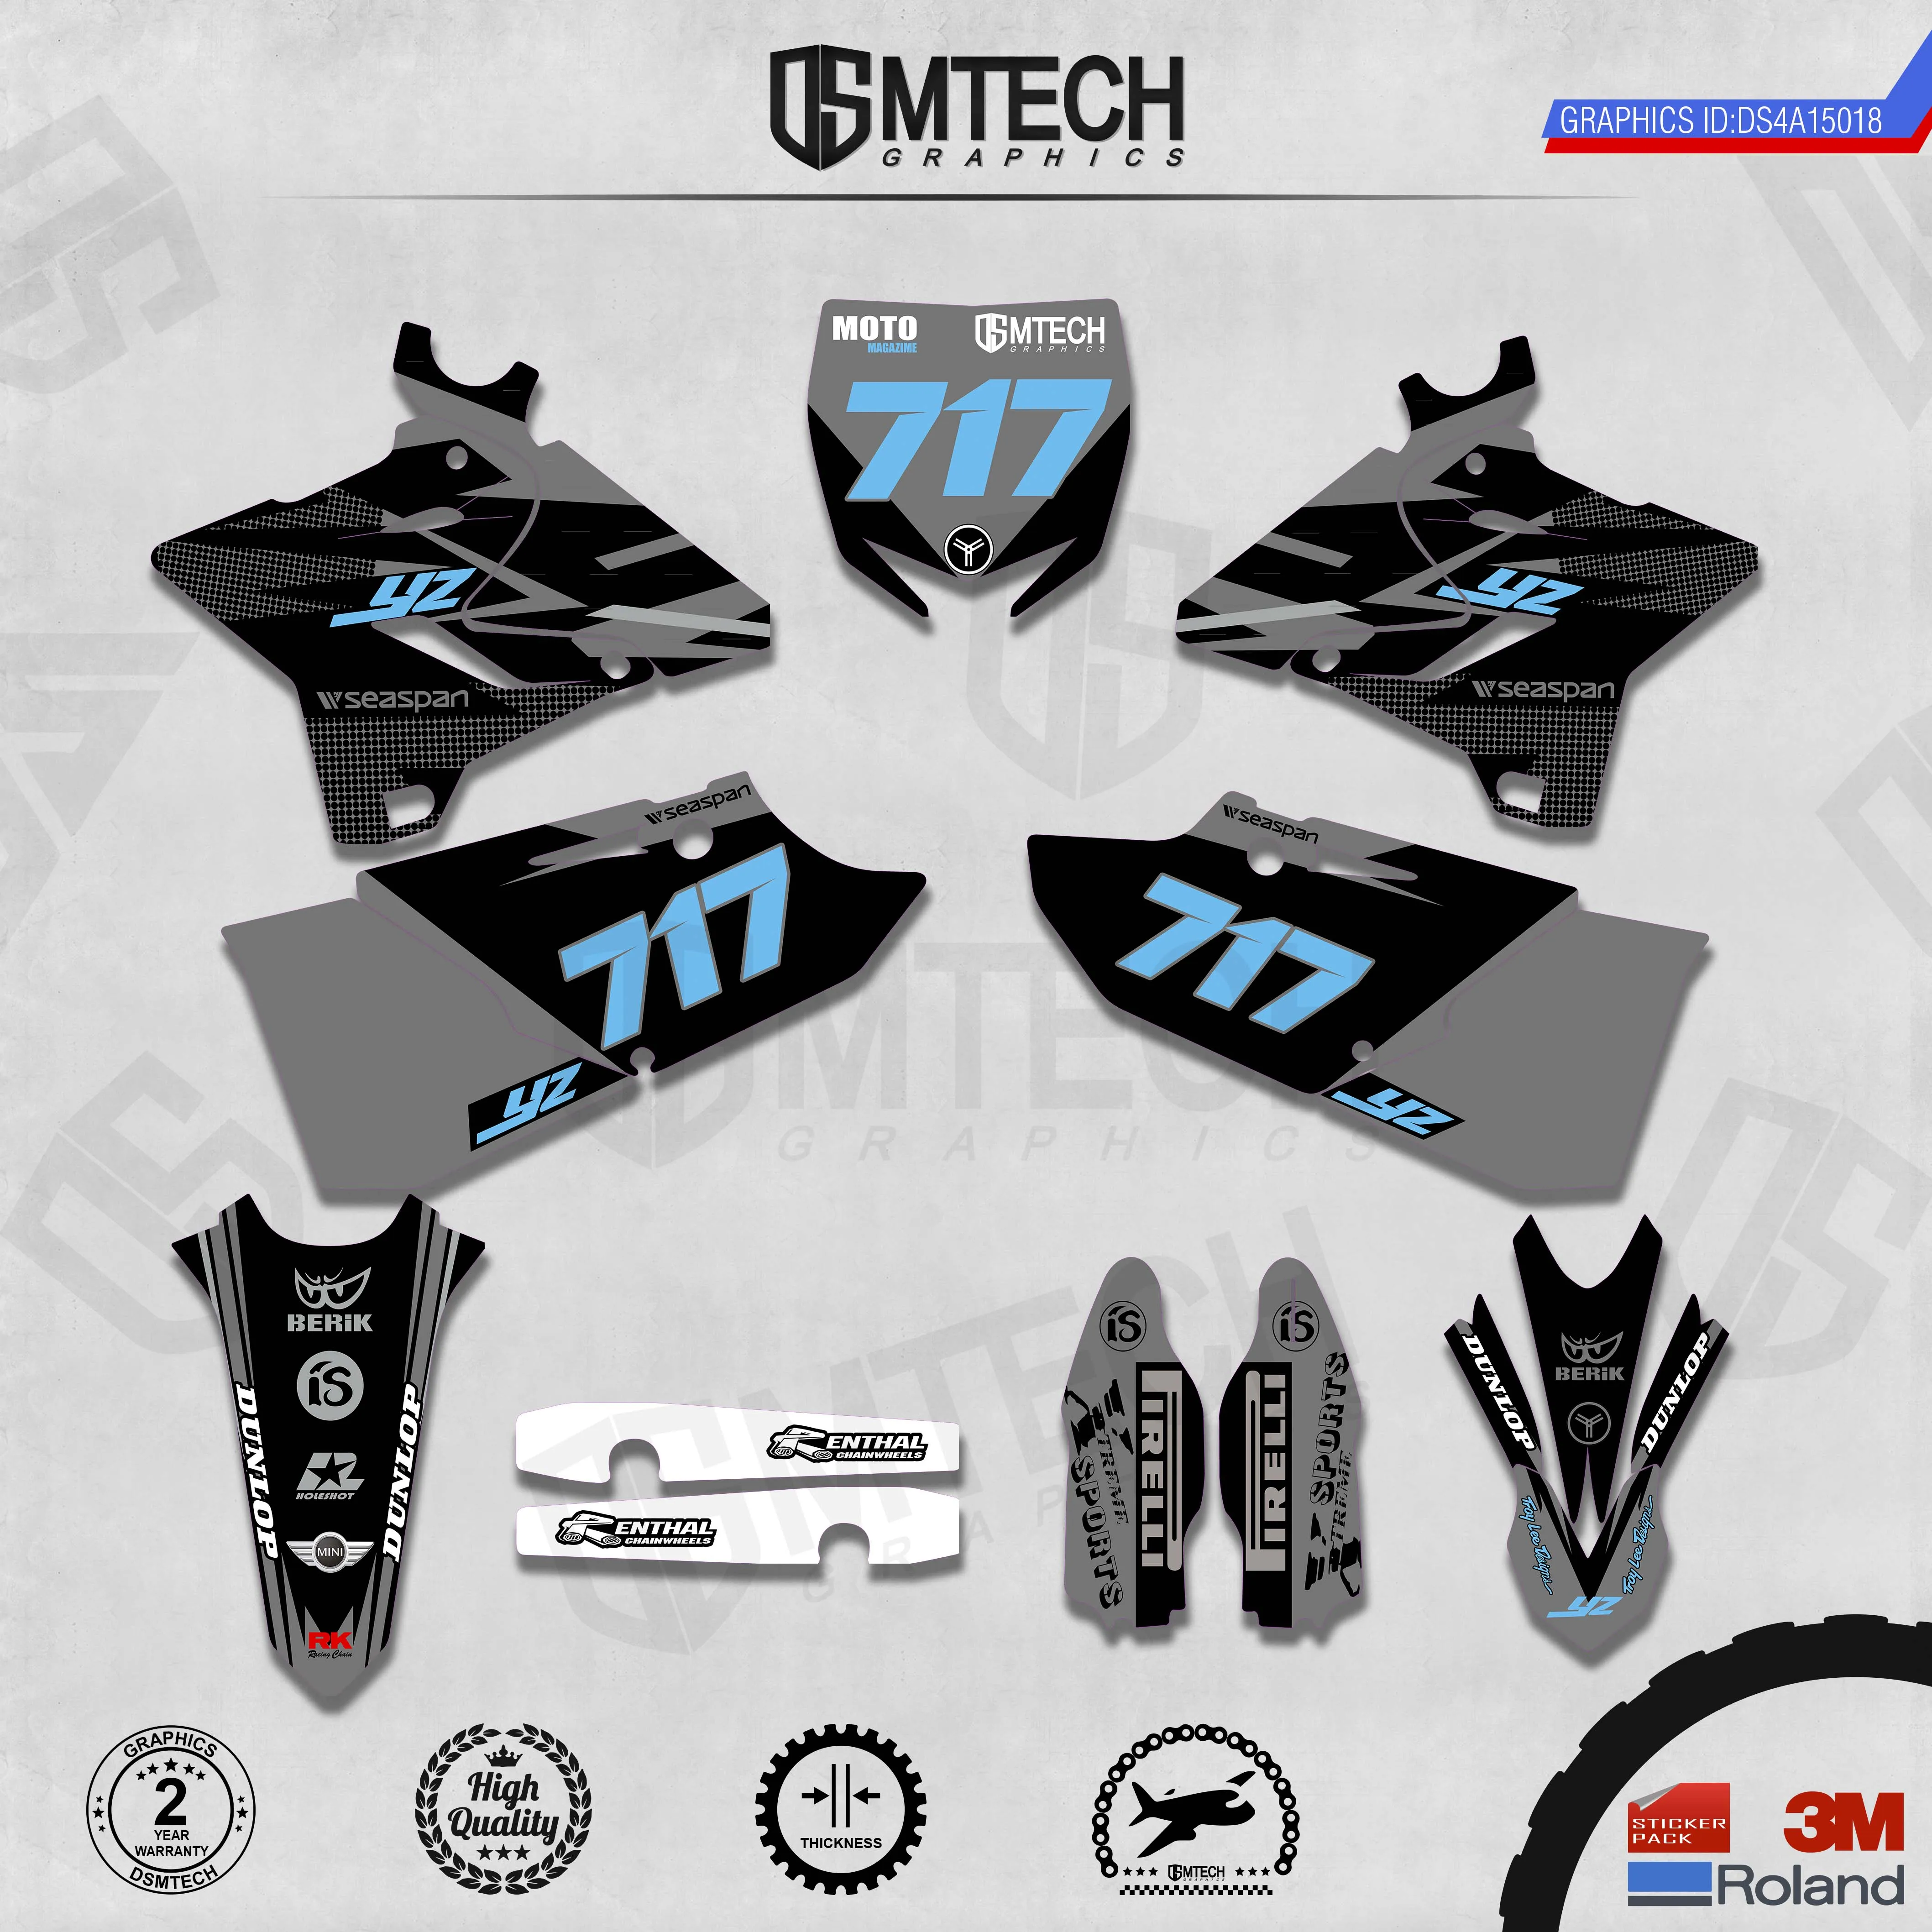 DSMTECH Customized Team Graphics Backgrounds Decals 3M Custom Stickers For   YZ125-250 Two Stroke 2015-2019  018